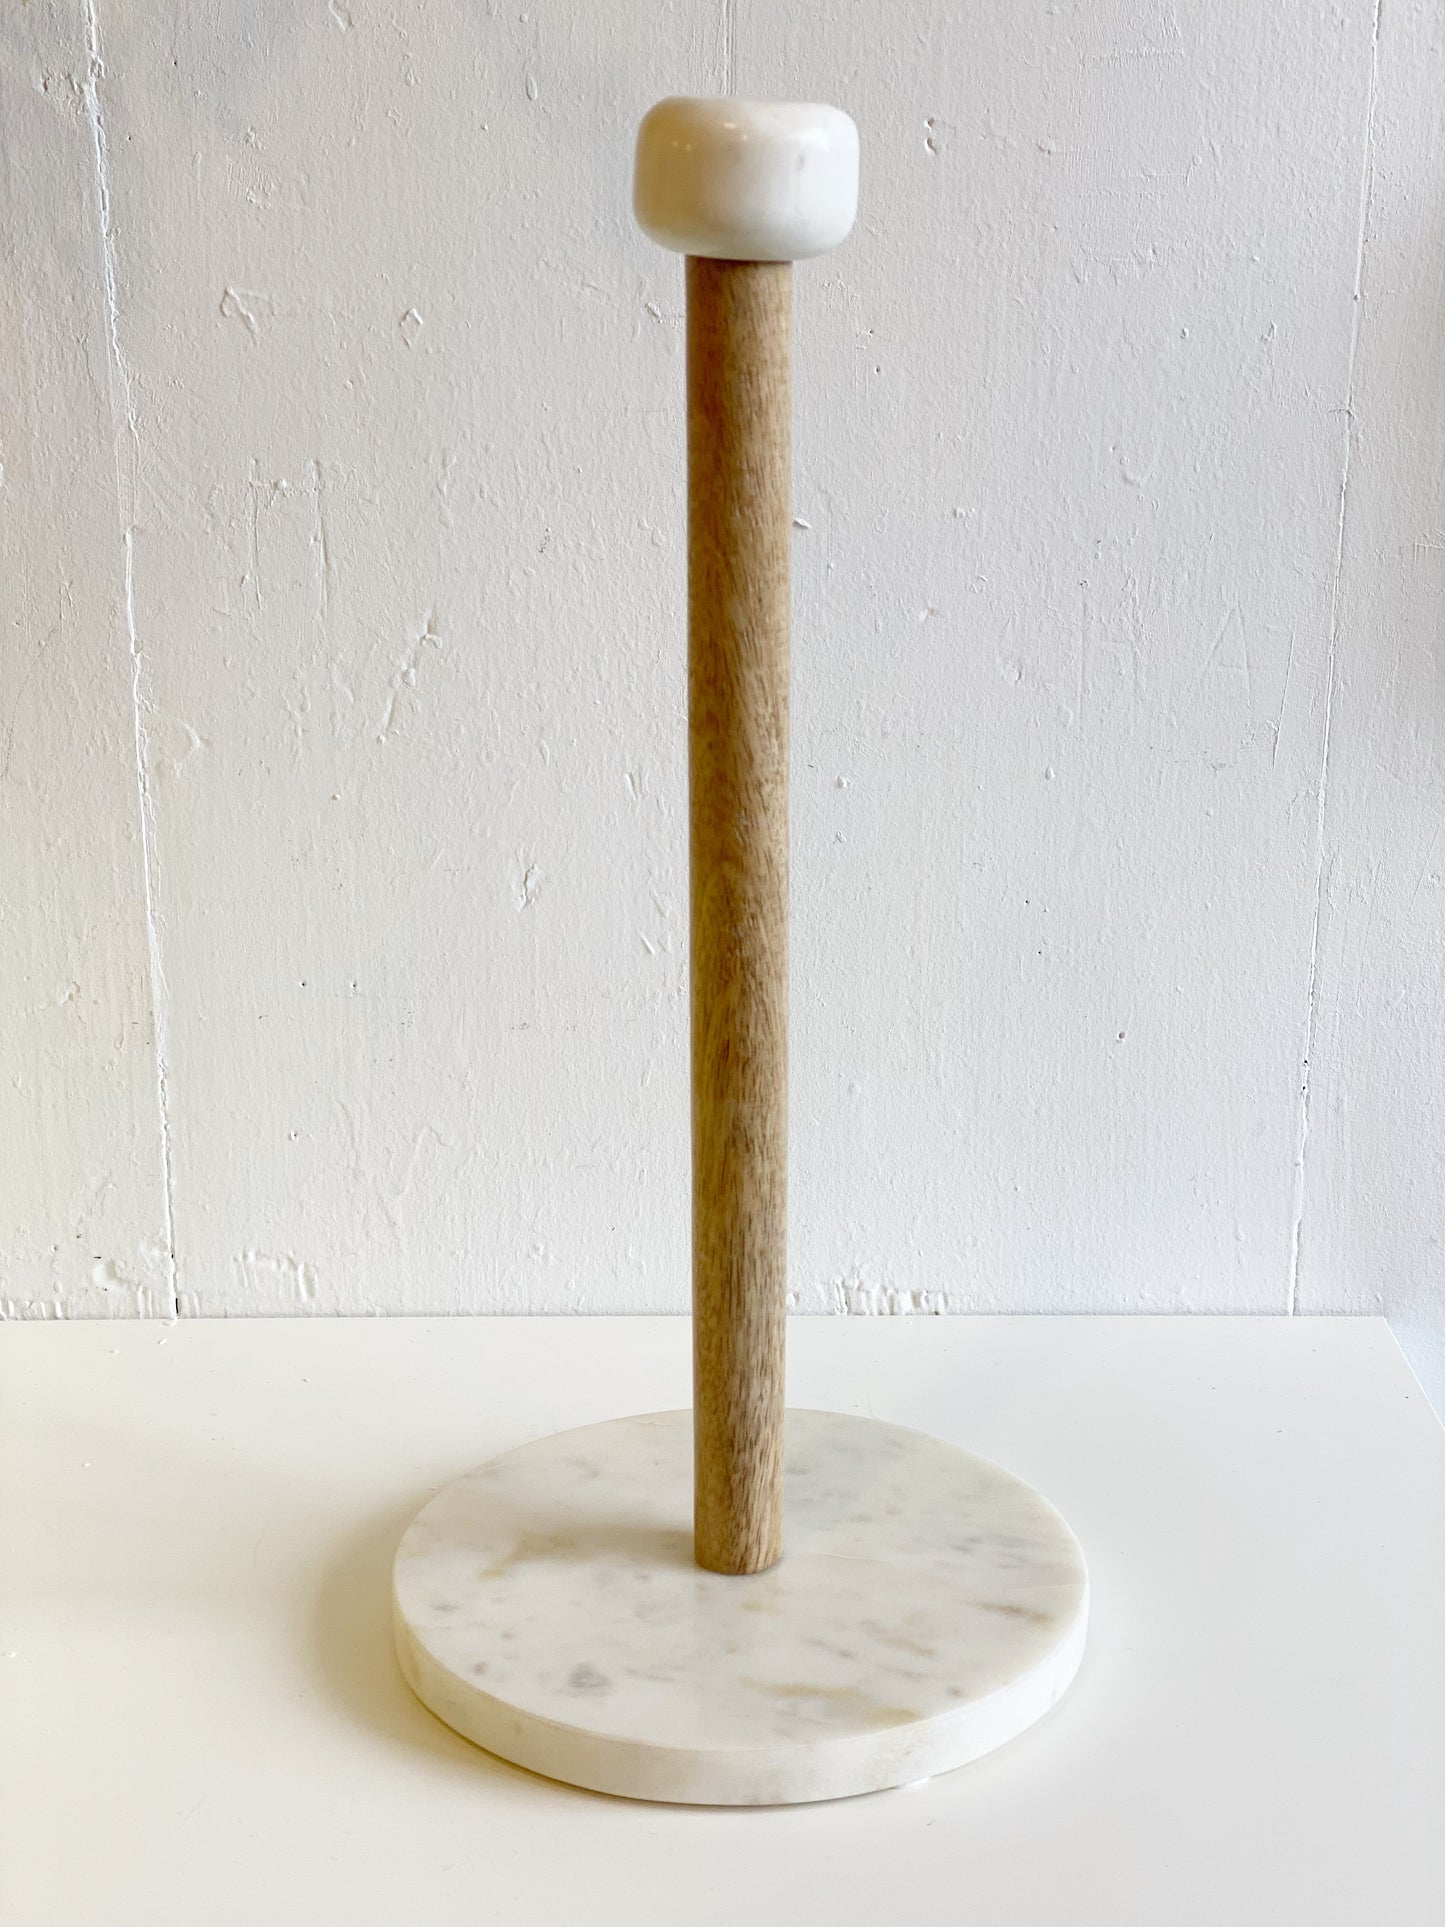 Marble and Wood Paper Towel Holder